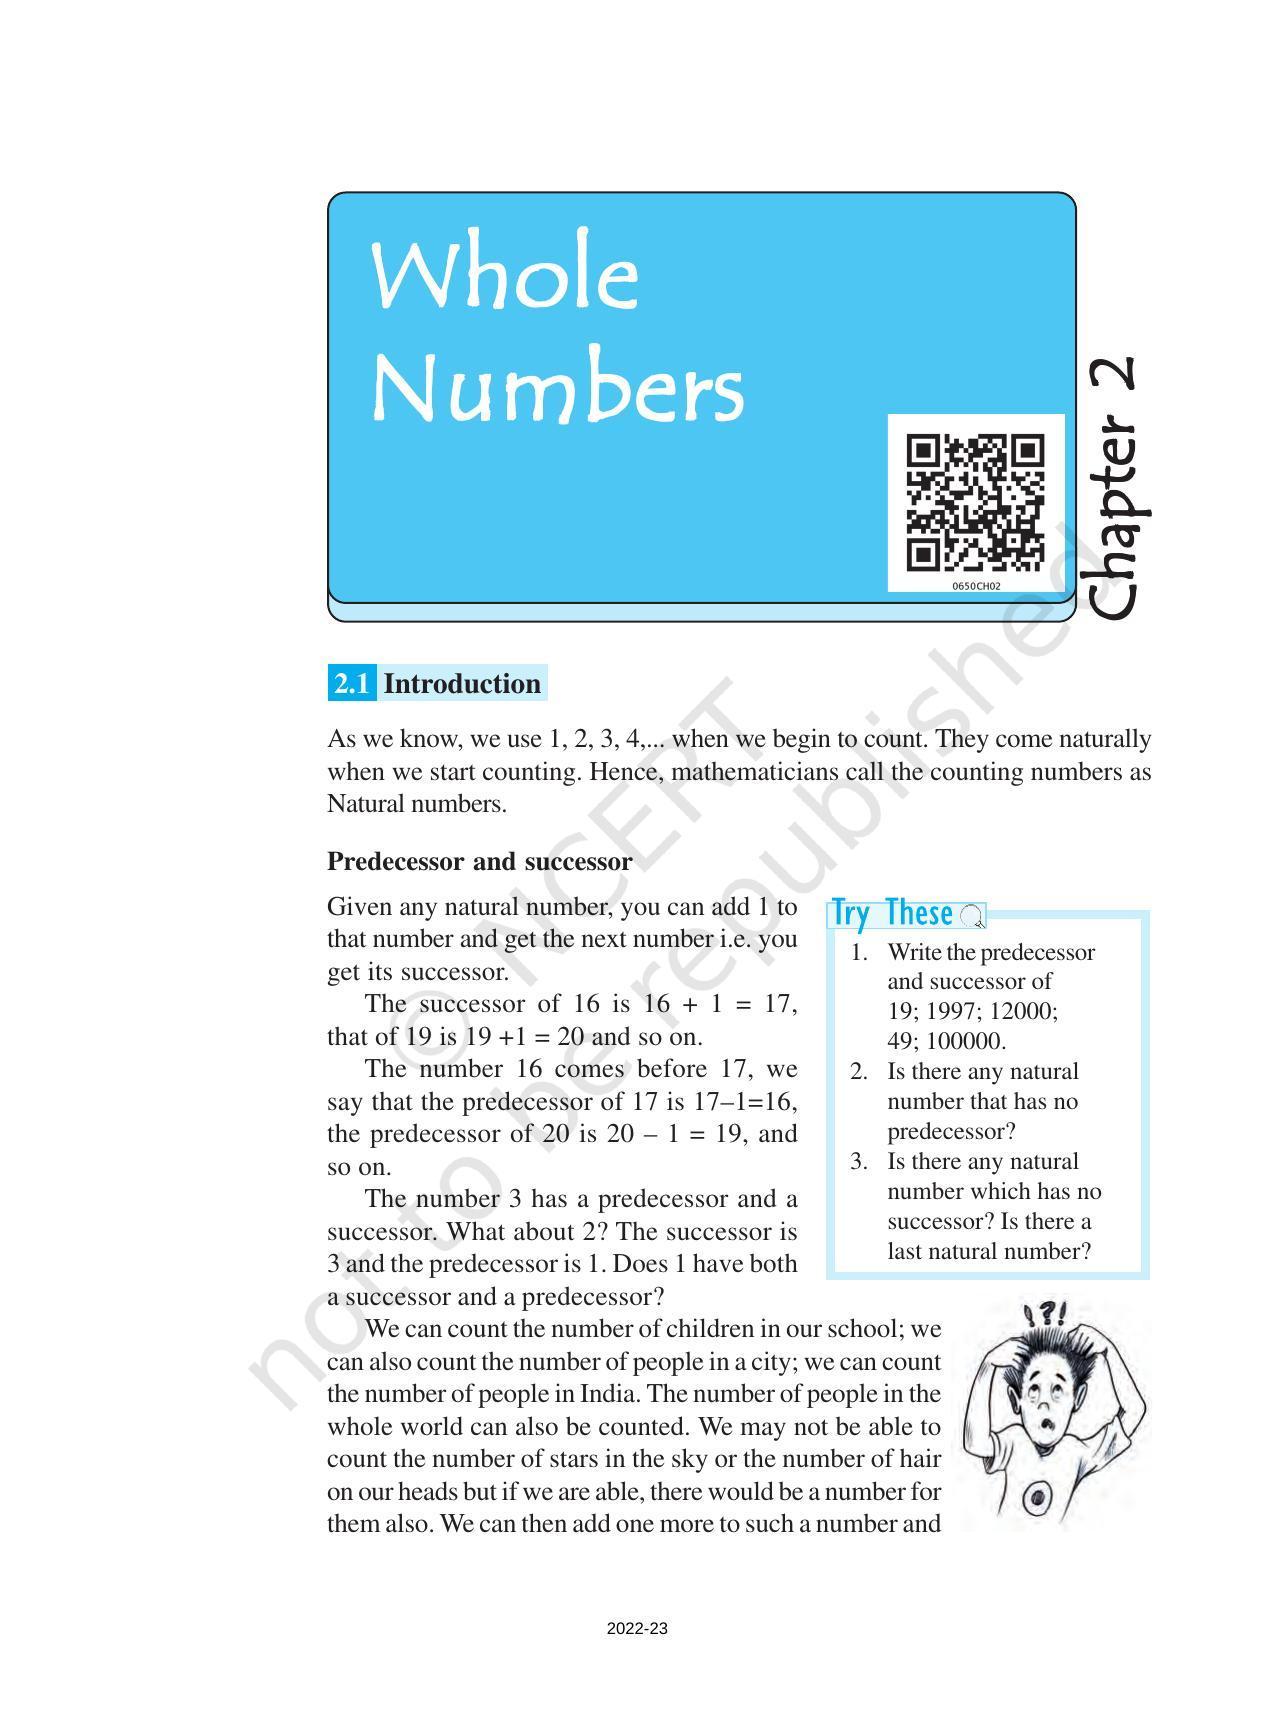 NCERT Book for Class 6 Maths: Chapter 2-Whole Numbers - Page 1